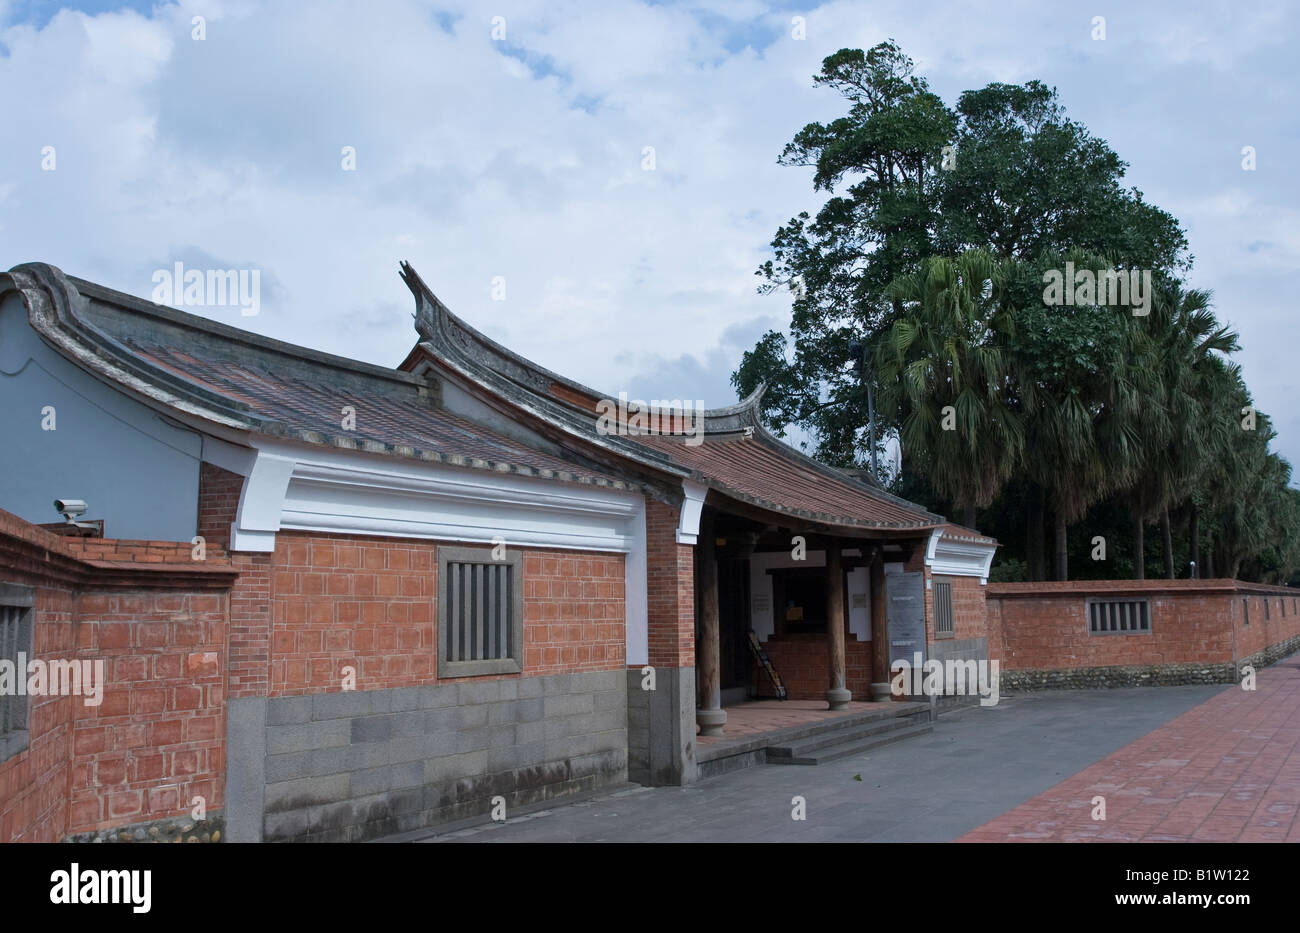 Lin Antai Old House The oldest residential building in Taipei this 30 room Fujian style house was built between 1783 and 1787. Stock Photo